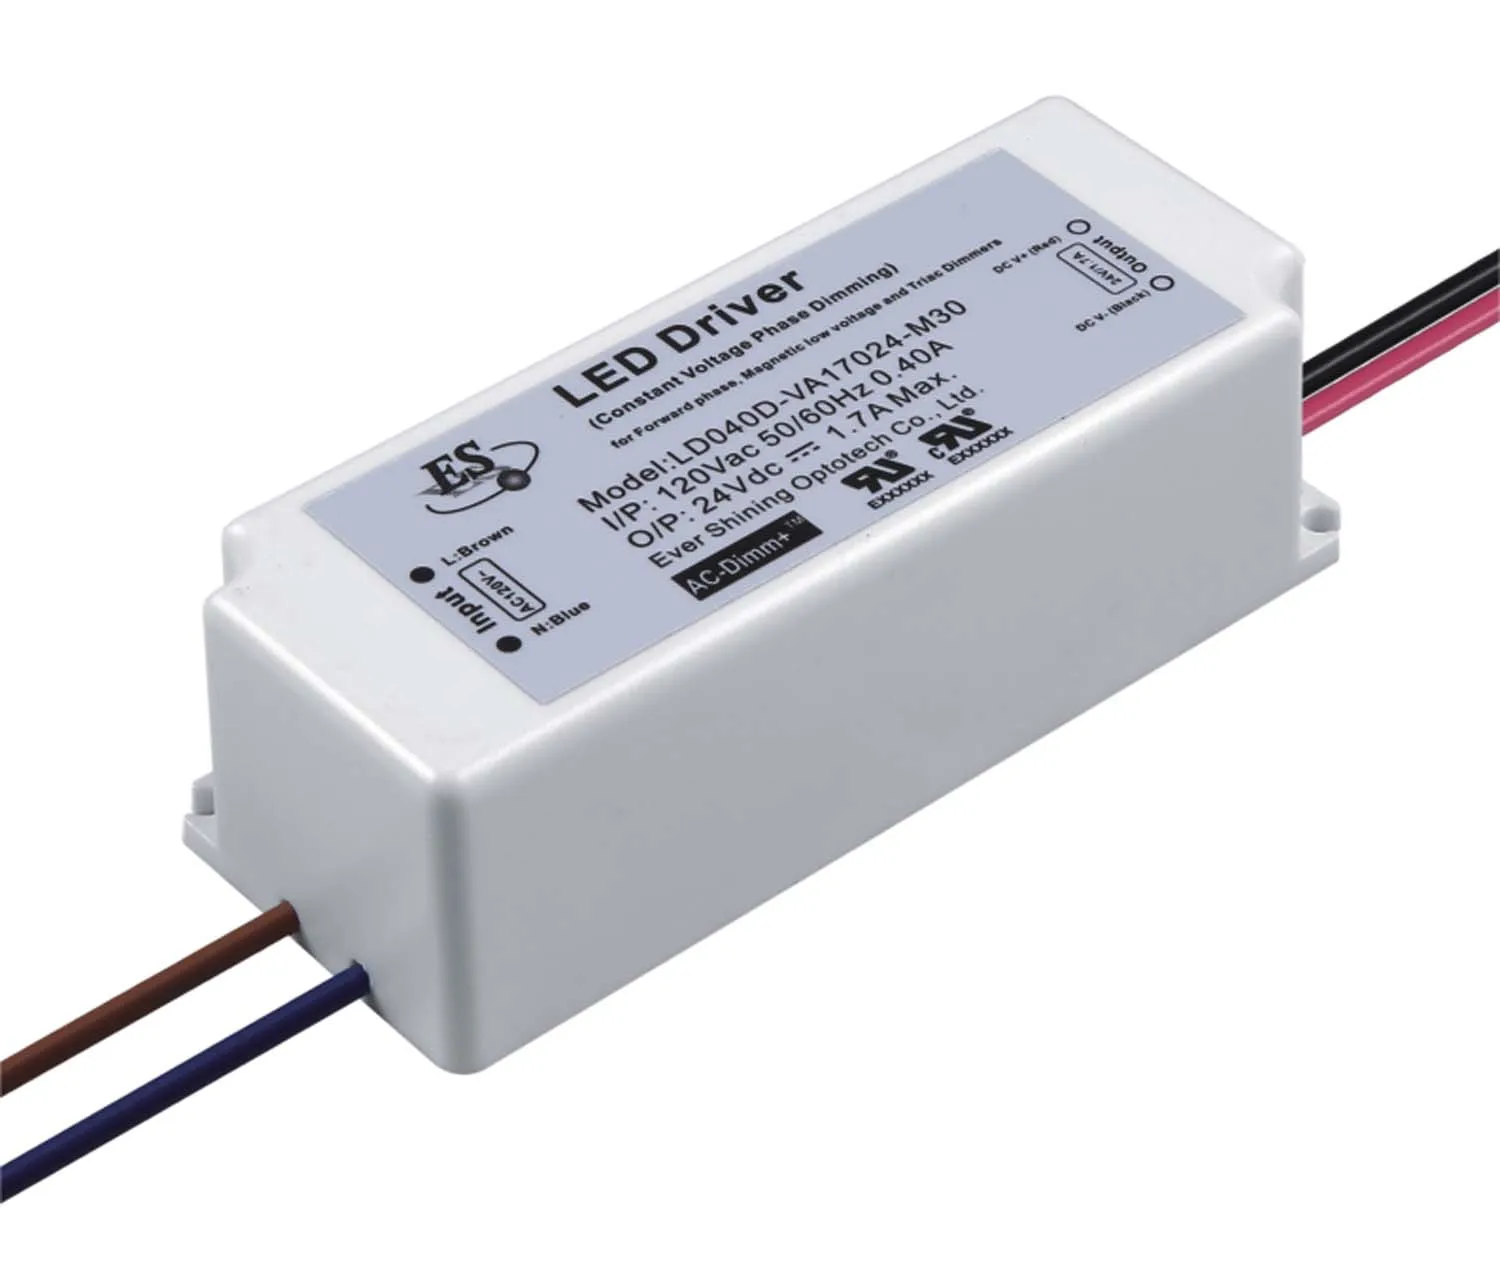 ES LED Driver UL listed 120VAC 24VDC Triac Dimming Constant Voltage LED_Driver 40W 24V waterproof IP65 LED Driver